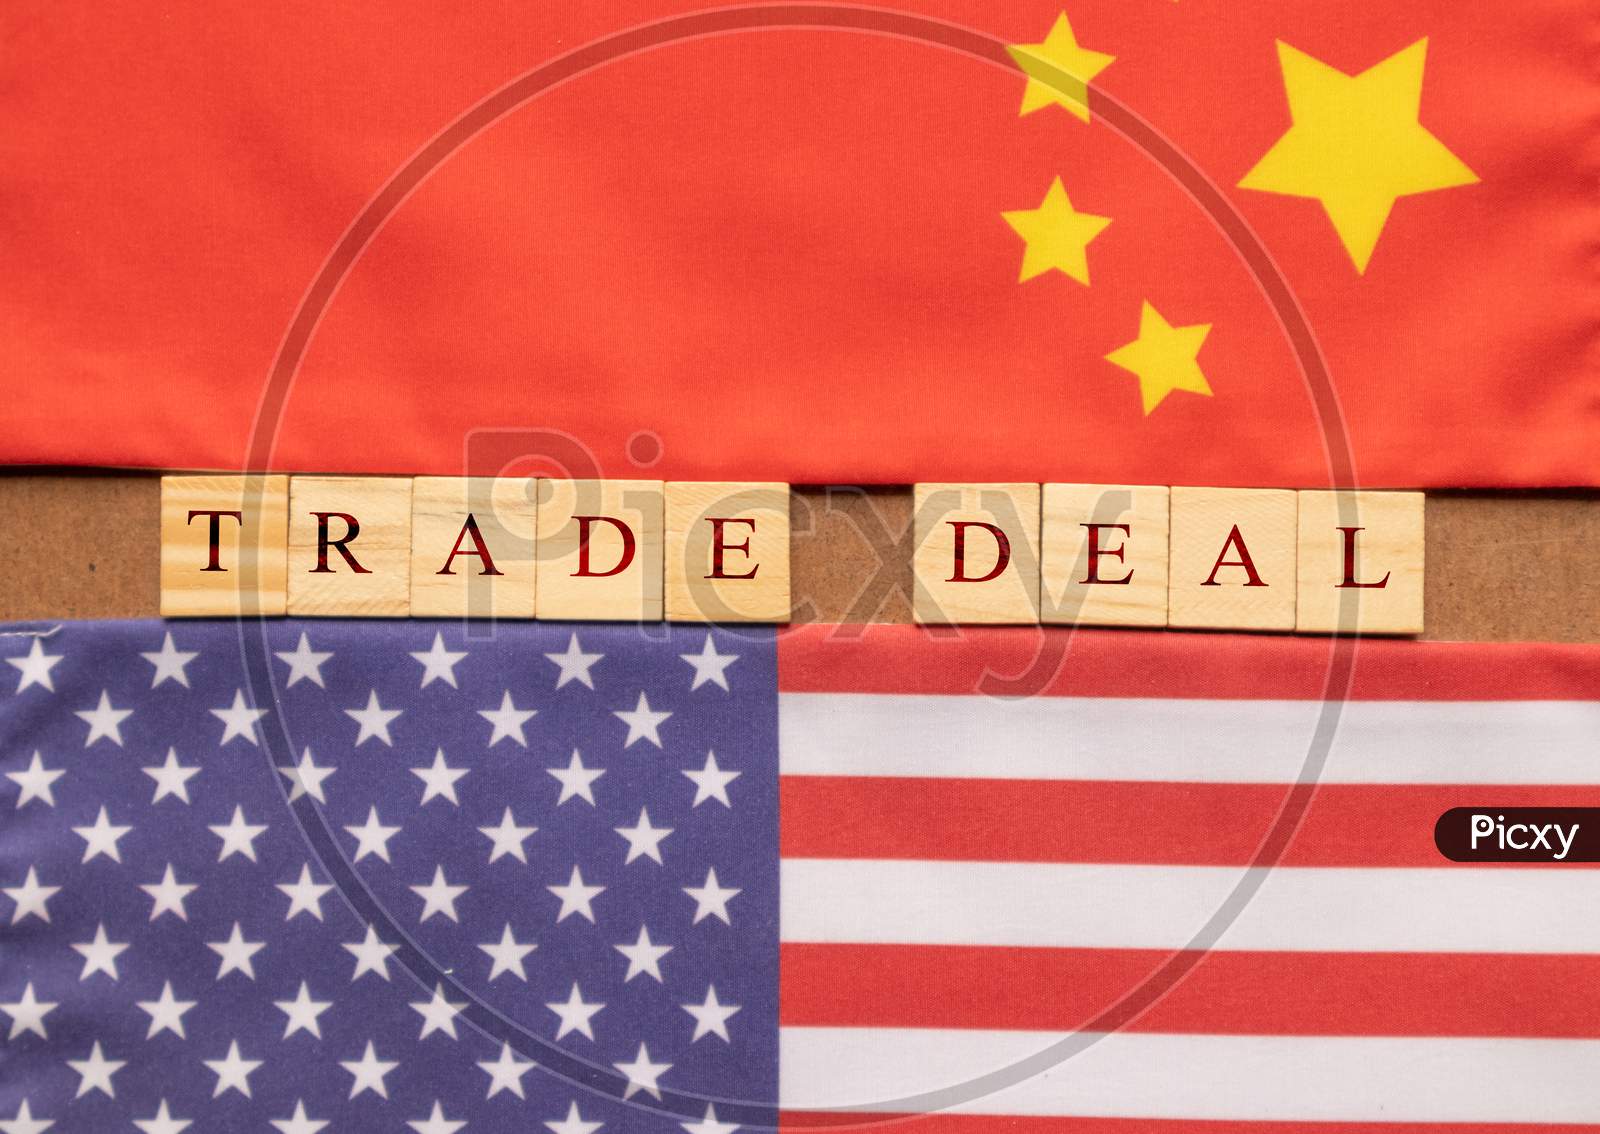 Concept Of China Us Trade Deal, Trade Deal Printed On Wooden Block Letters In Between China And Us Flags.